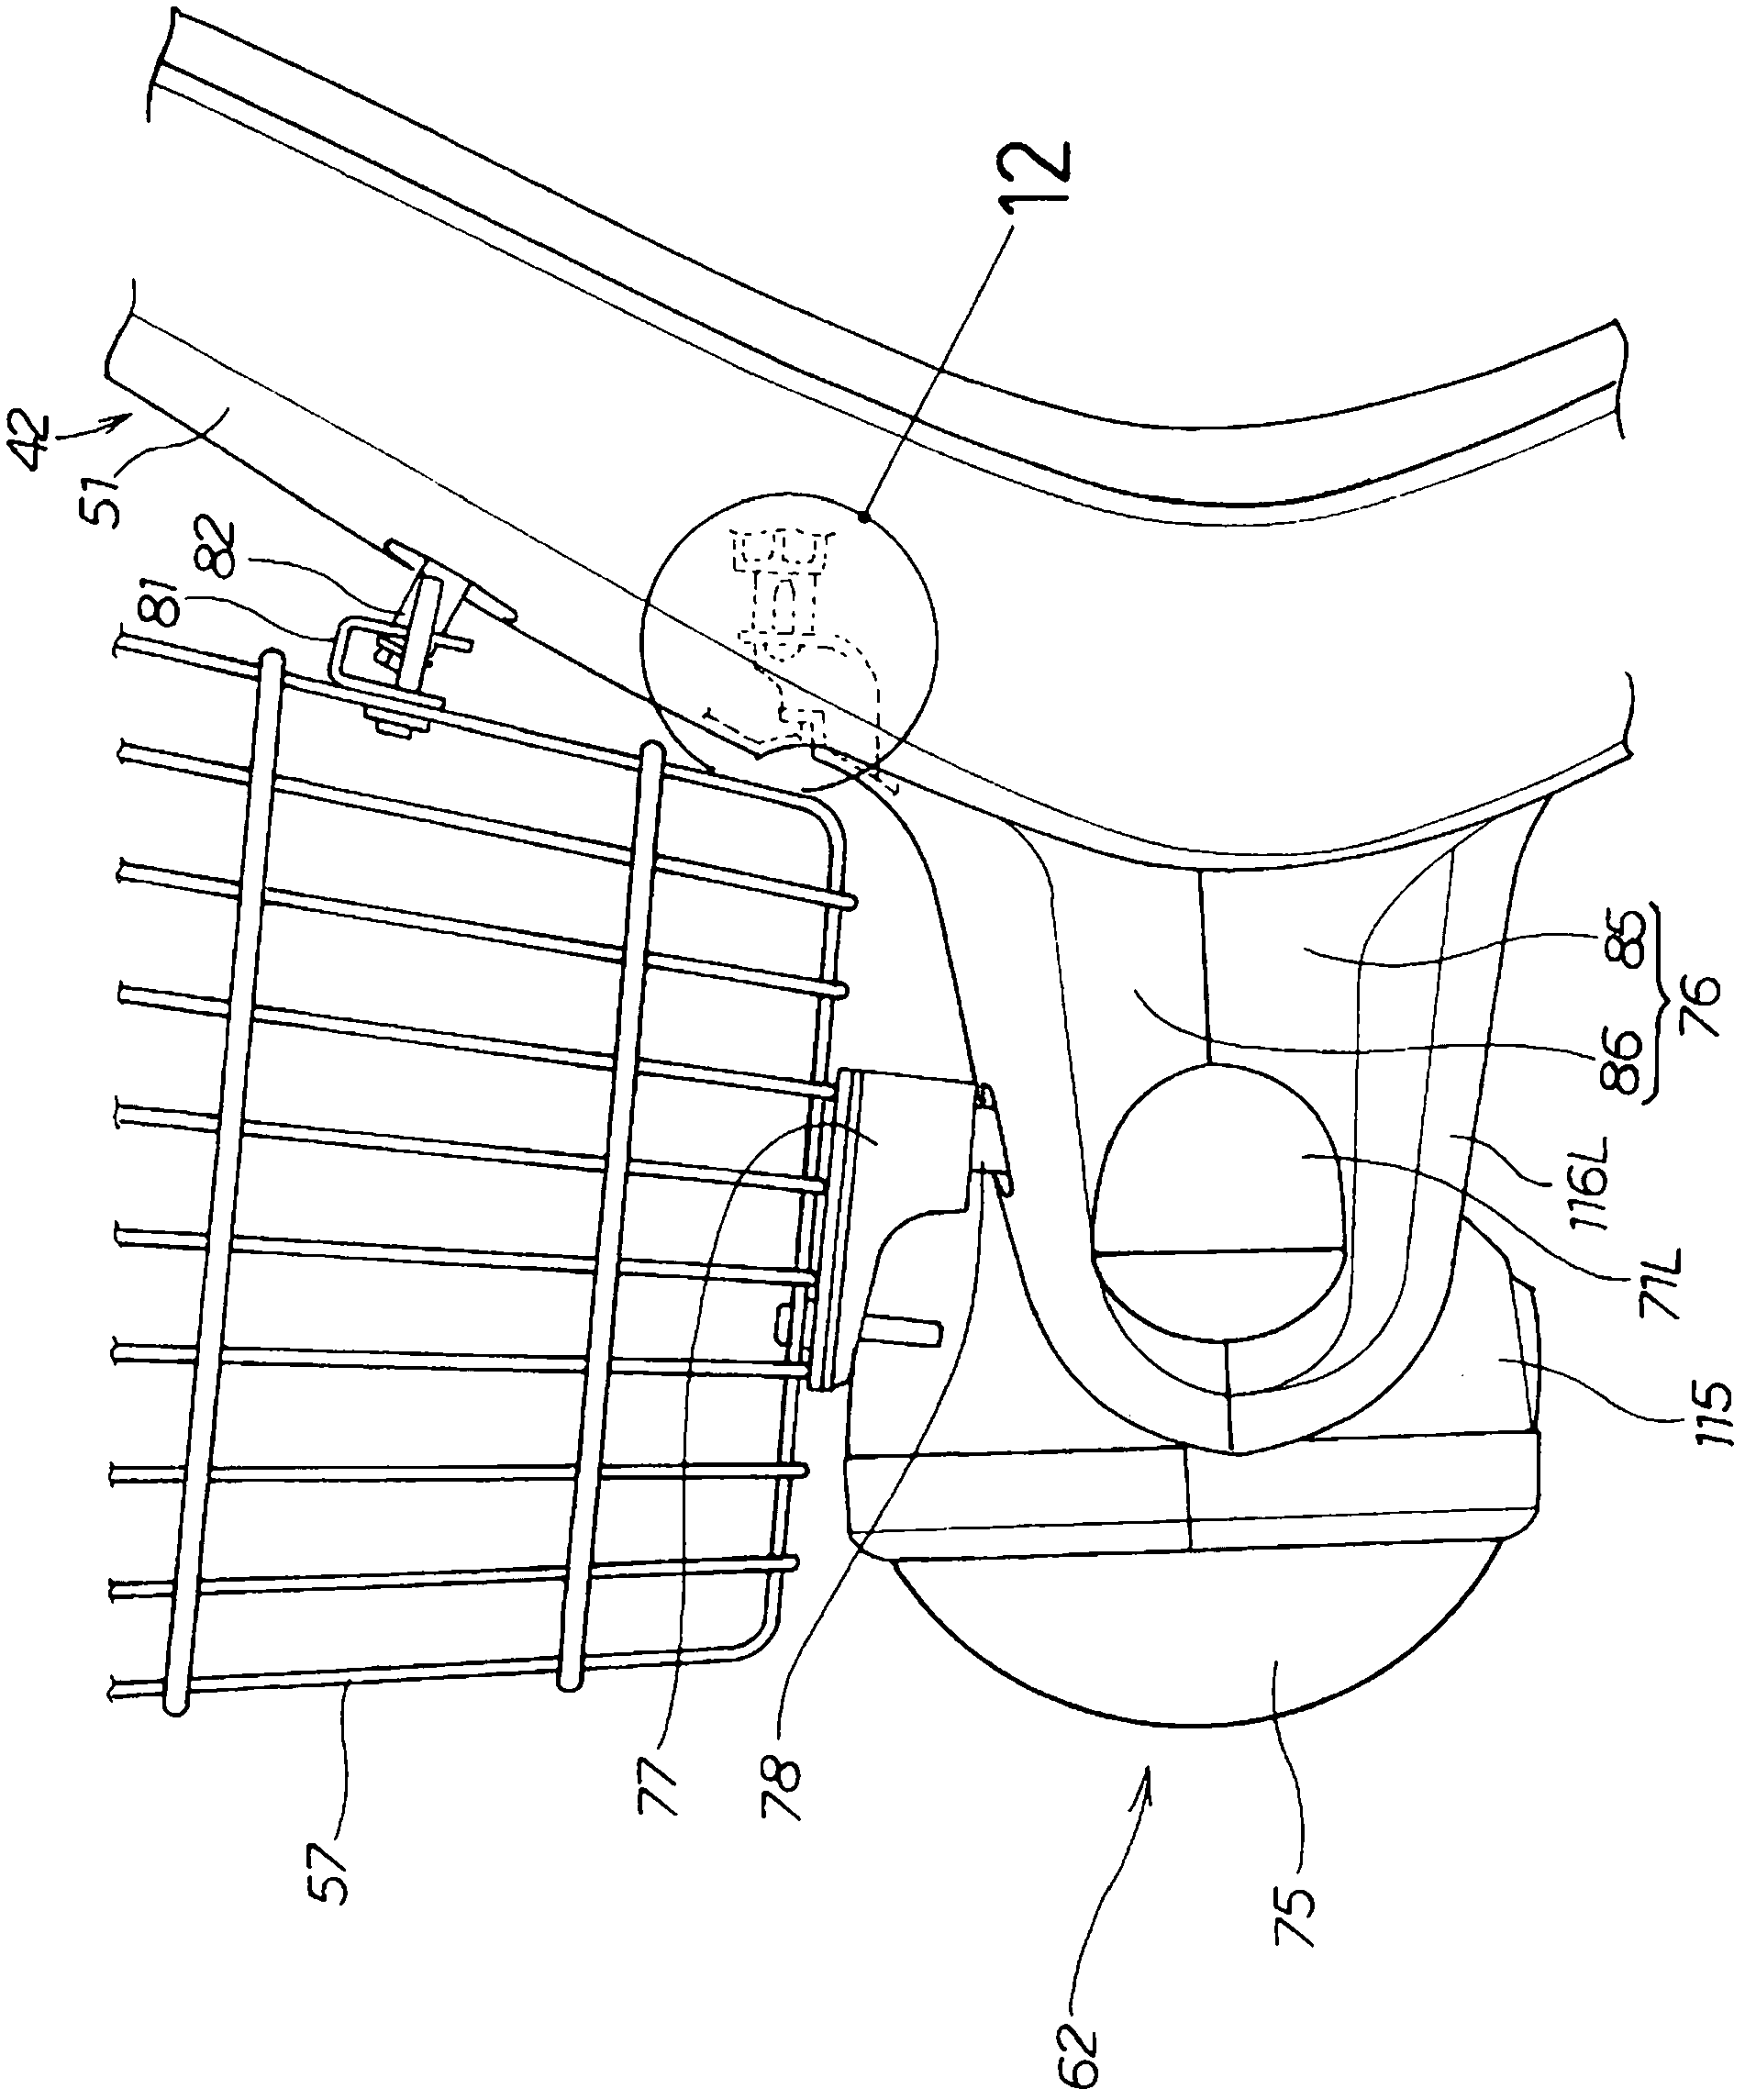 Vehicle lighting device supporting structure